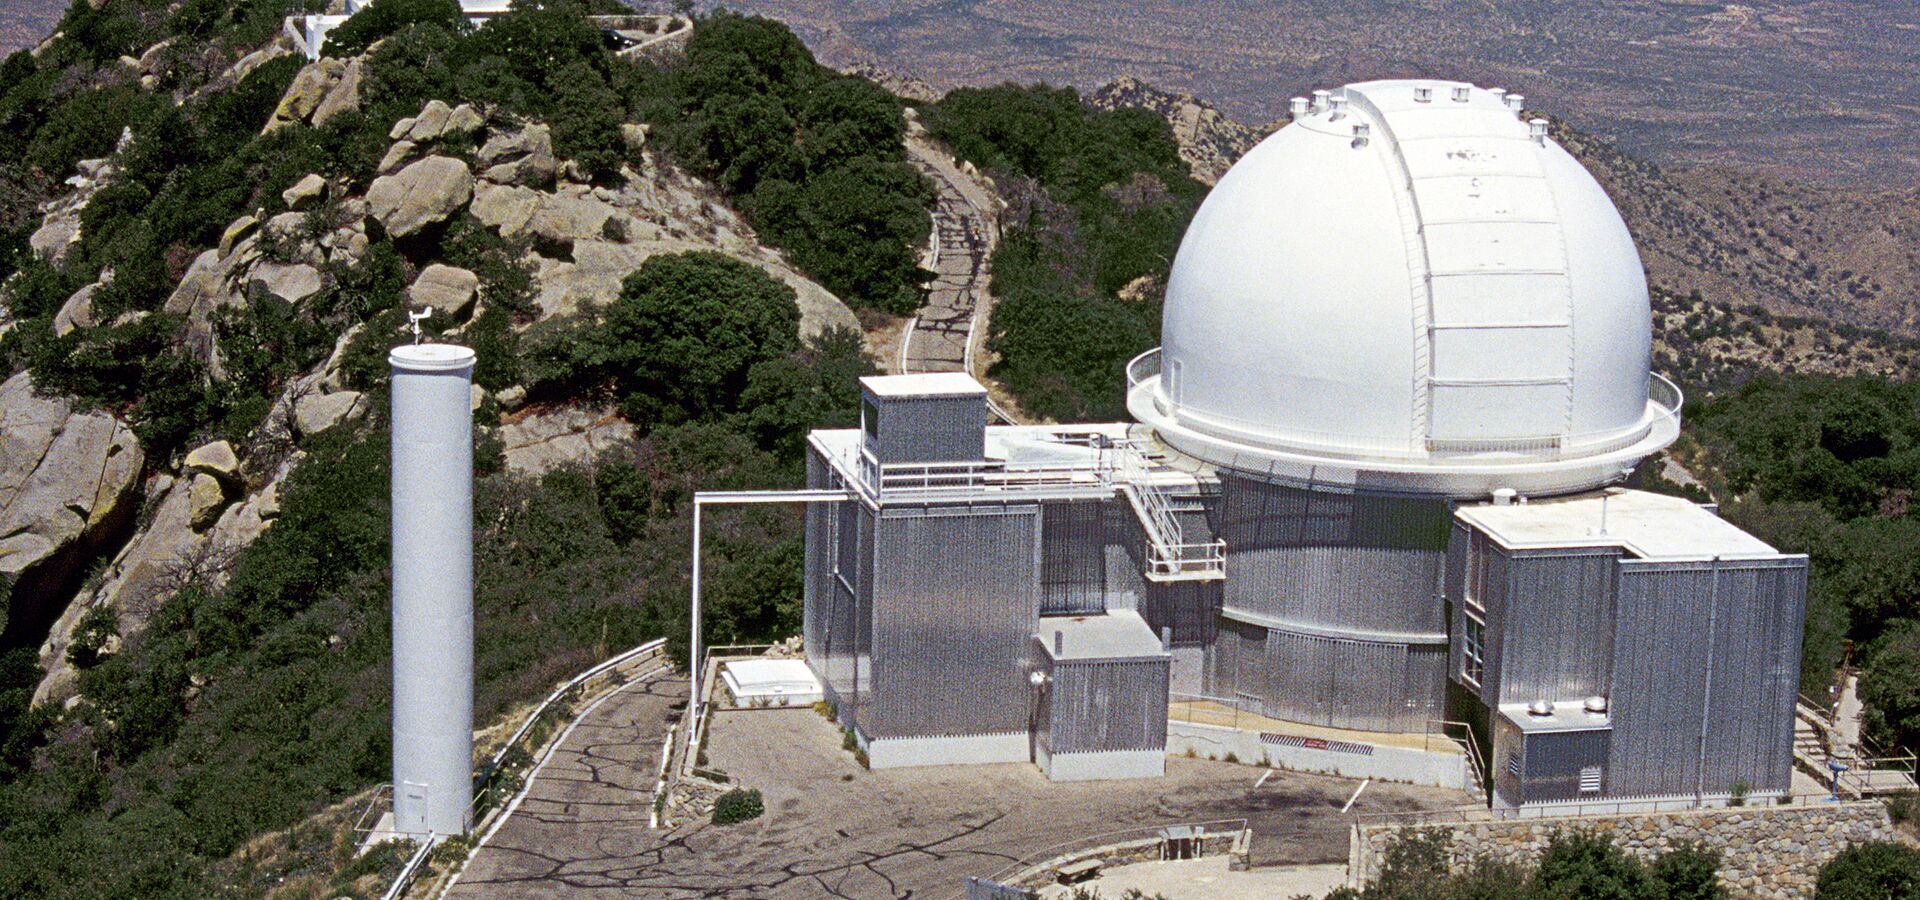 The 0.9-meter Coudé Feed Telescope consists of a 0.9 m alt-azimuth three-mirror telescope with a dedicated spectrograph system.